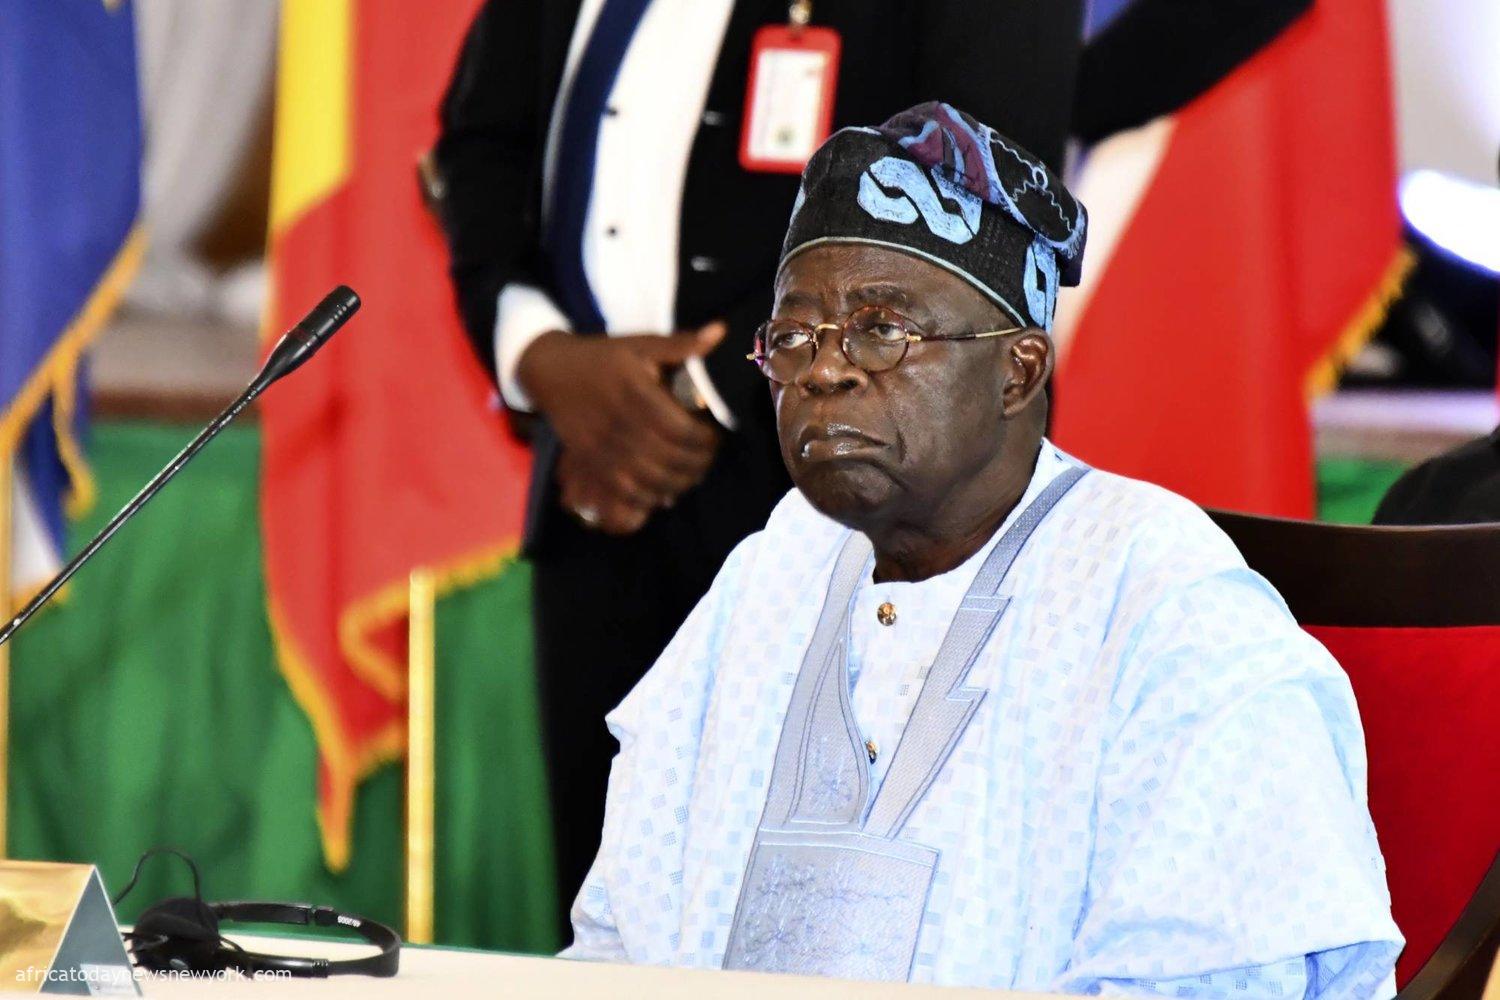 I Am In Talks With World Leaders To End Coup Menace - Tinubu